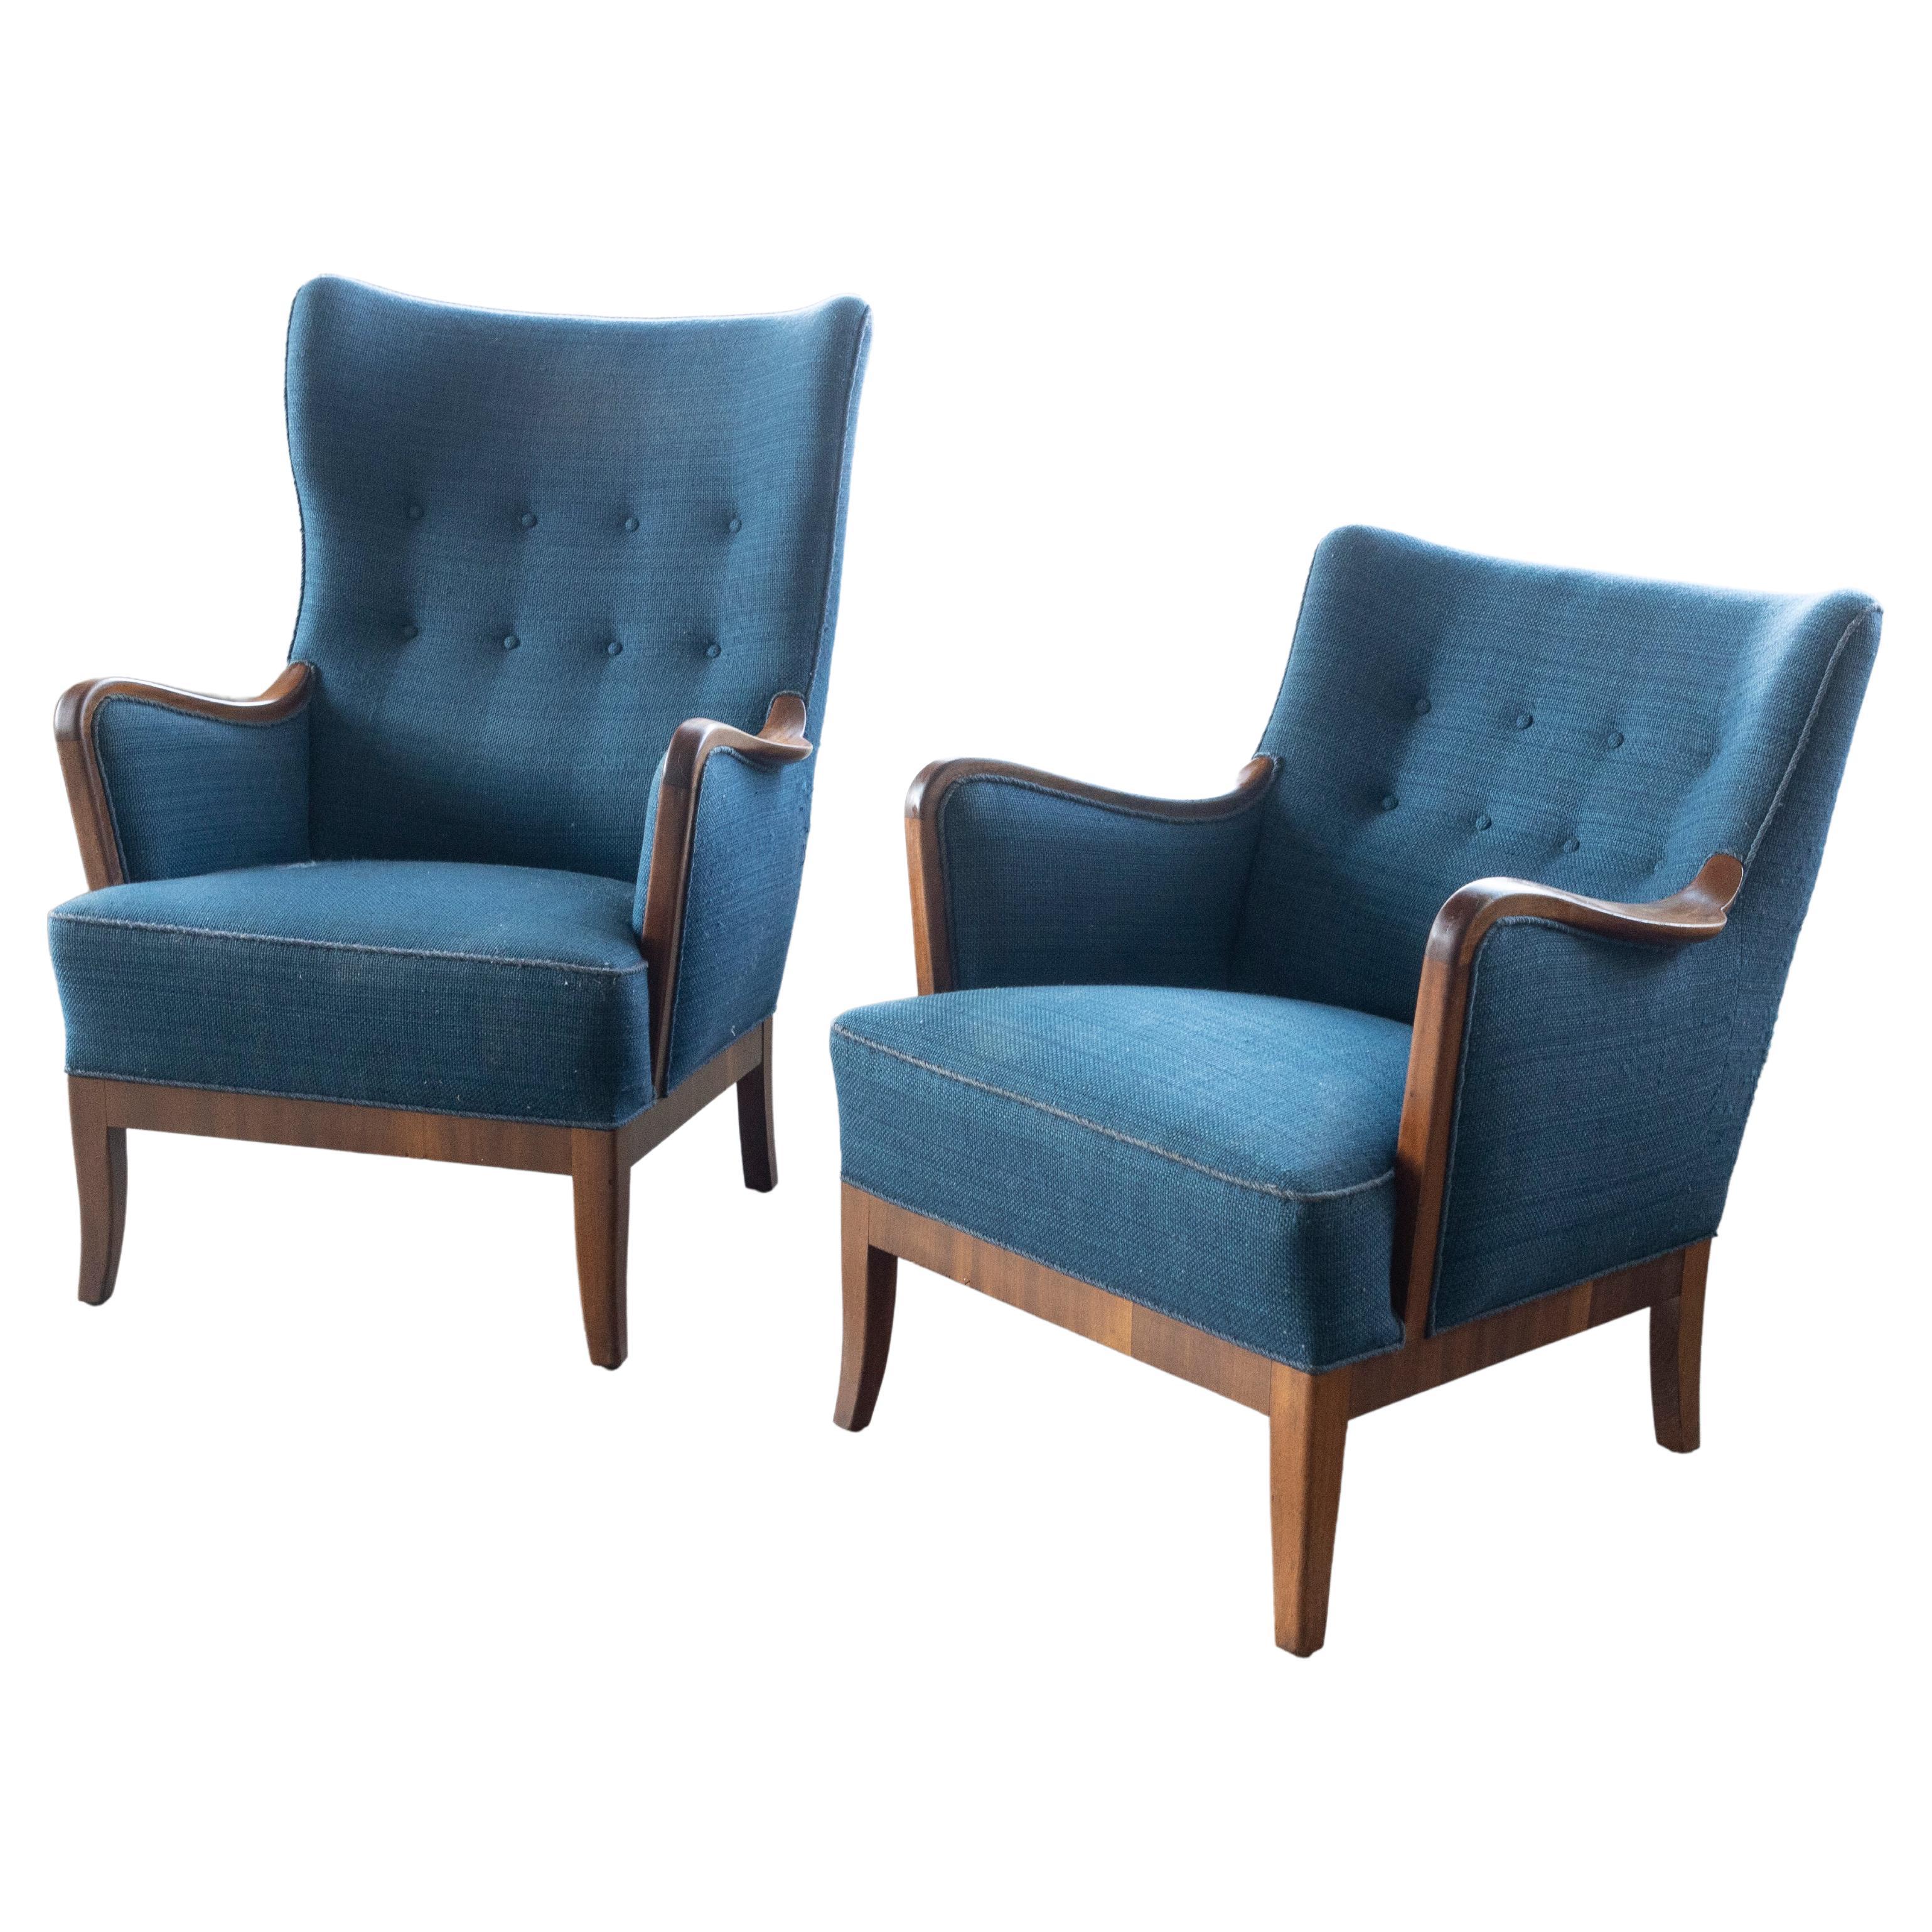 Pair of Danish Midcentury Lounge Chairs with Walnut Frames and Legs